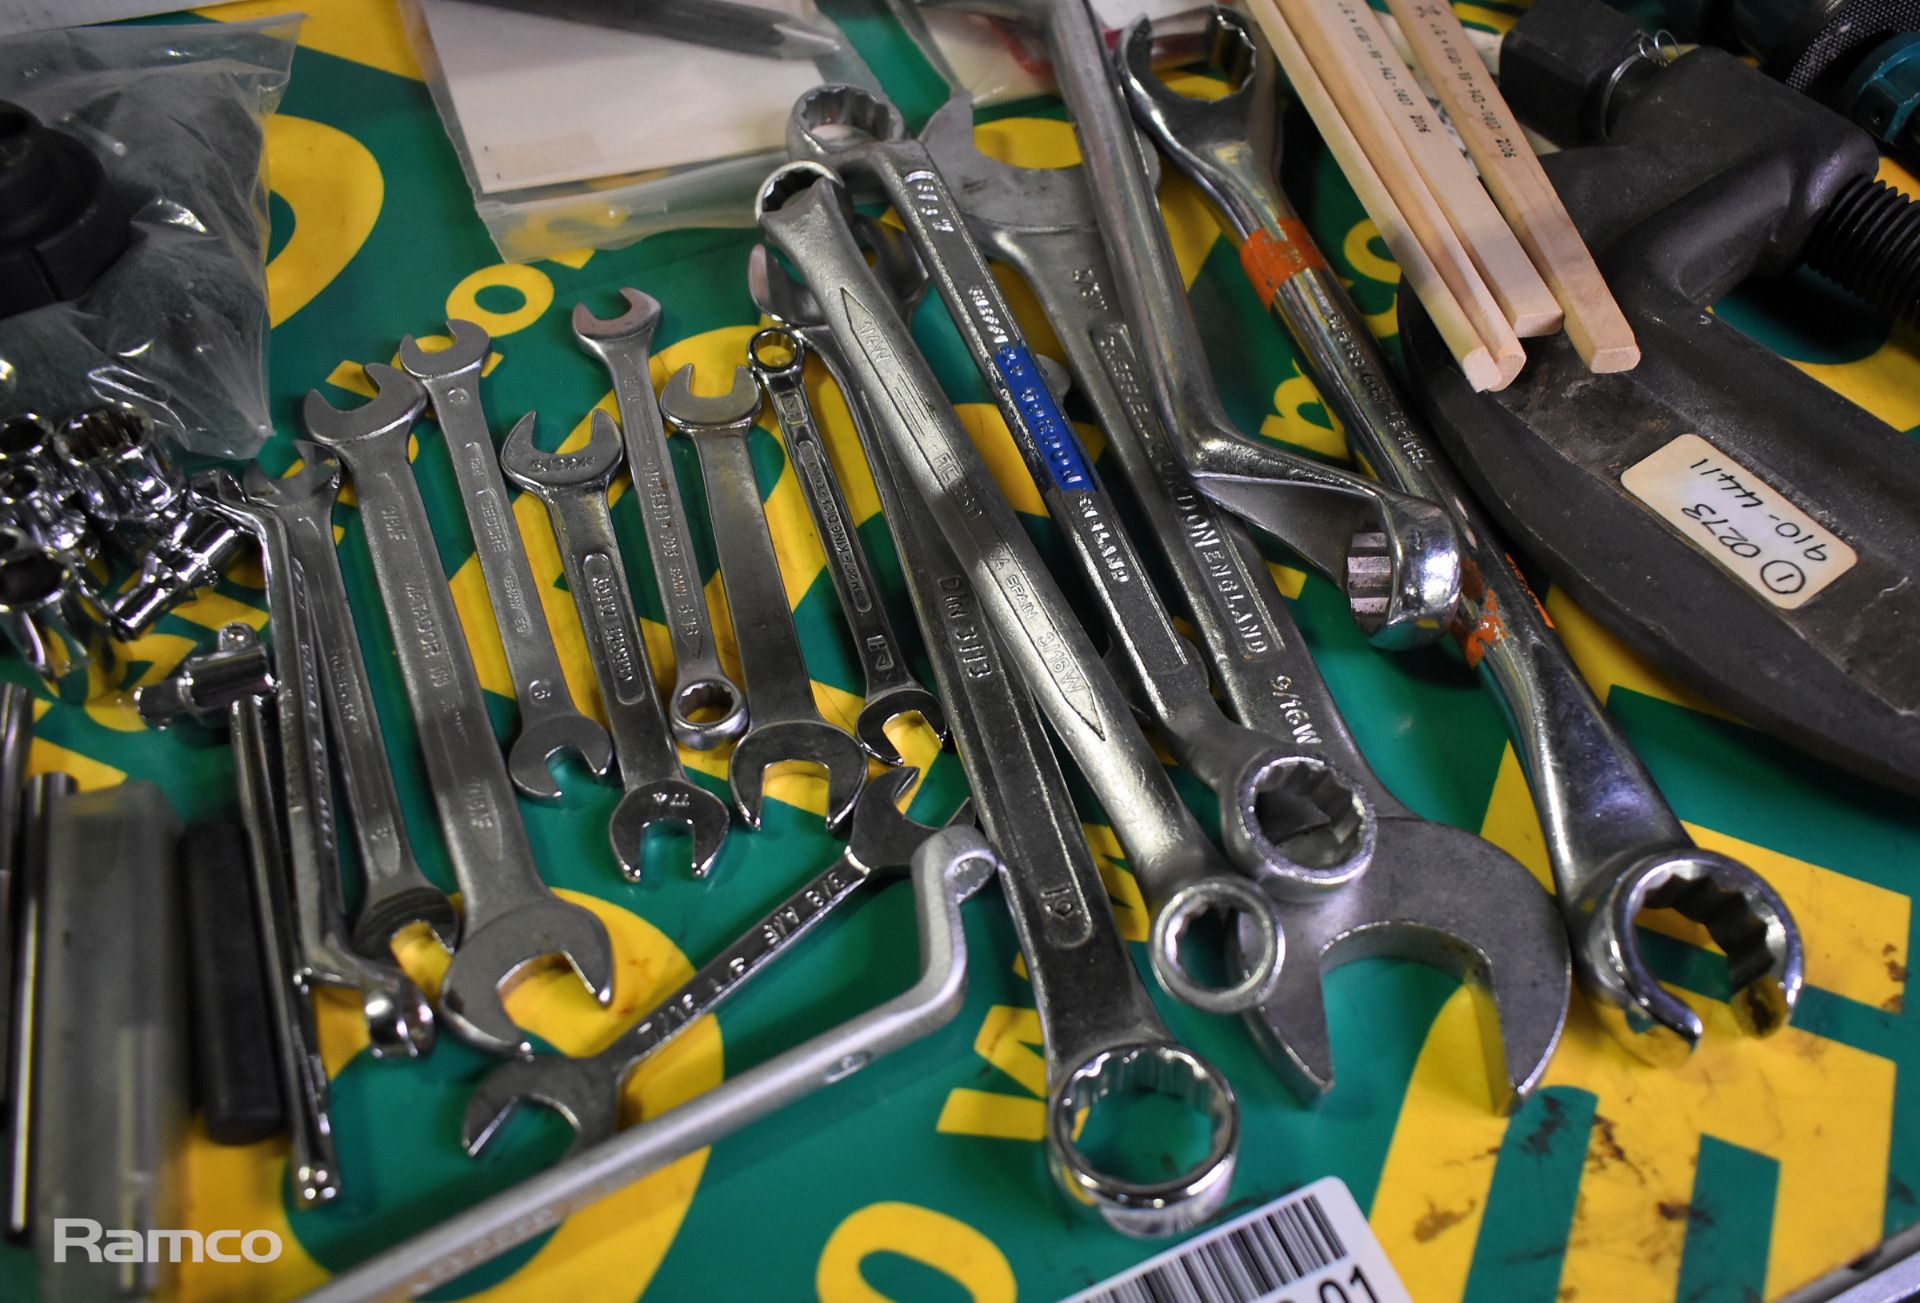 Workshop tools - grease guns, screwdriver sets, spanners, clamps, sockets, torque wrench - Image 5 of 8